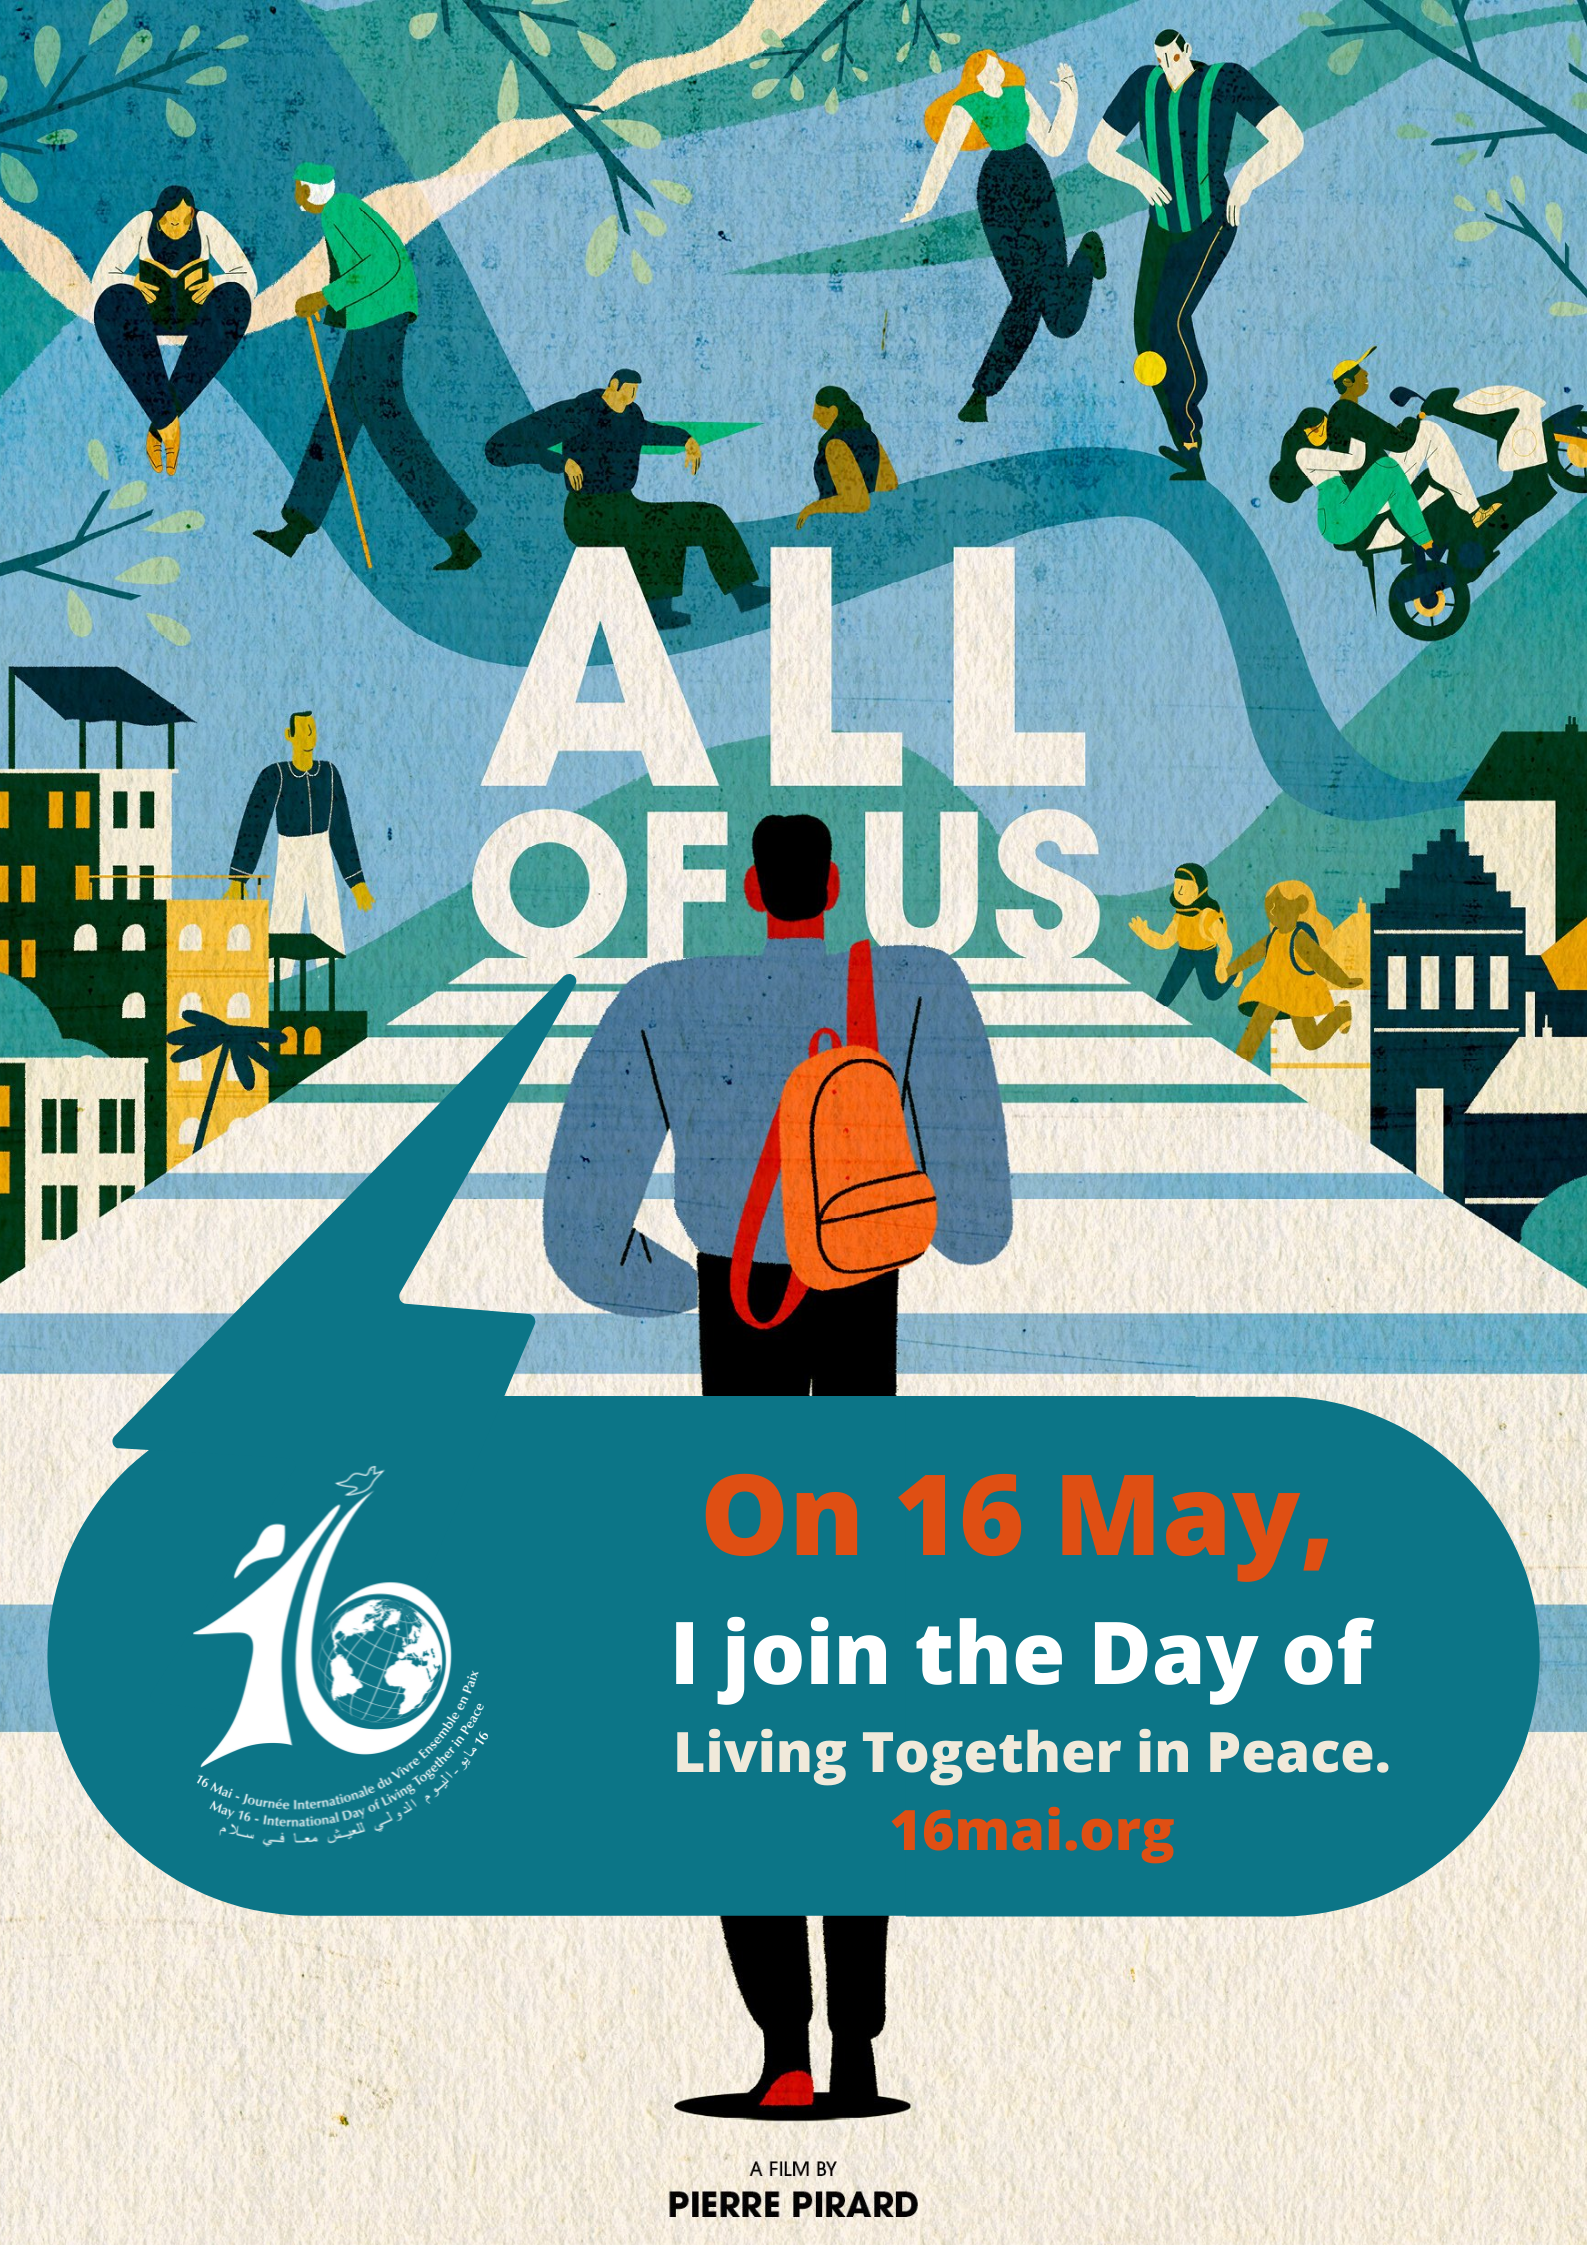 All of us - day of living together in peace